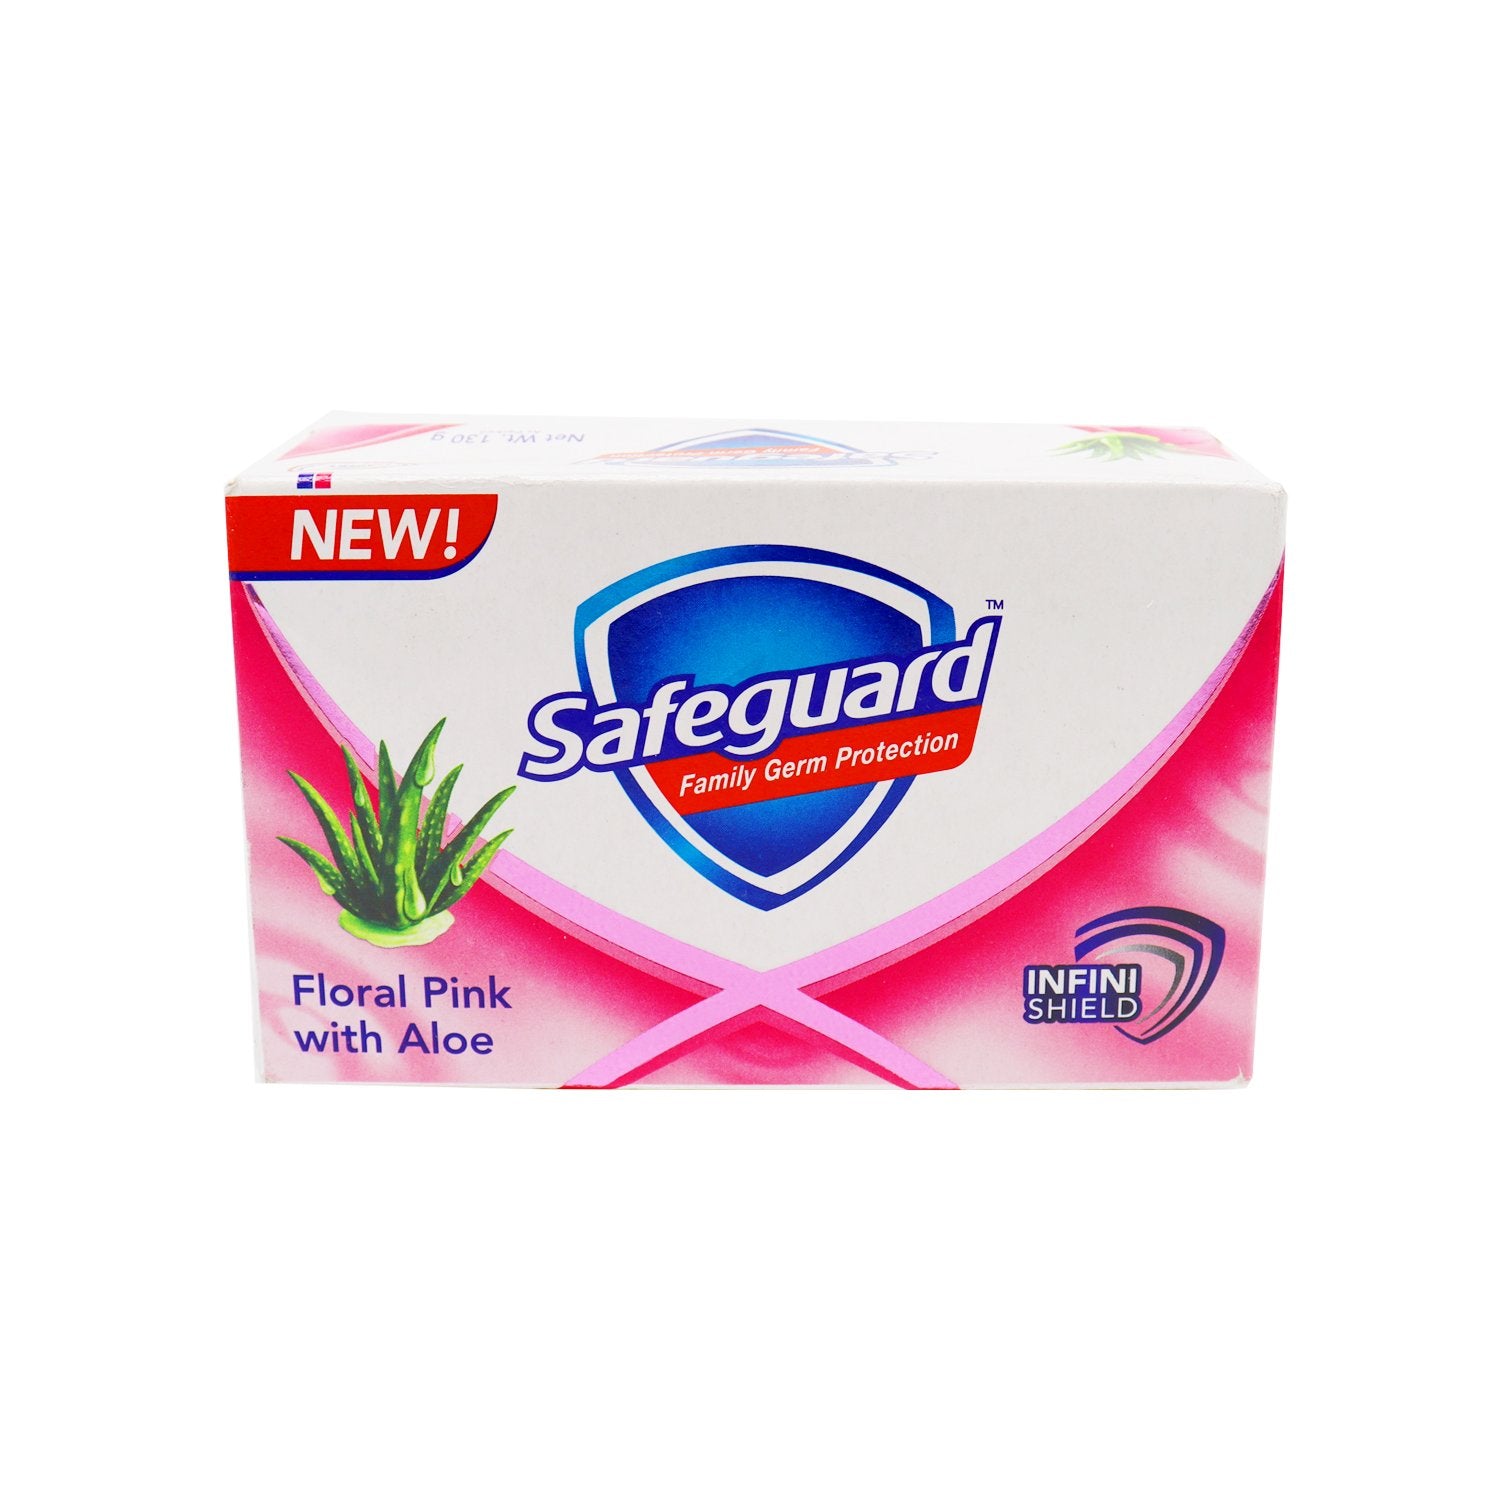 SAFEGUARD FLORAL PINK WITH ALOE 175G